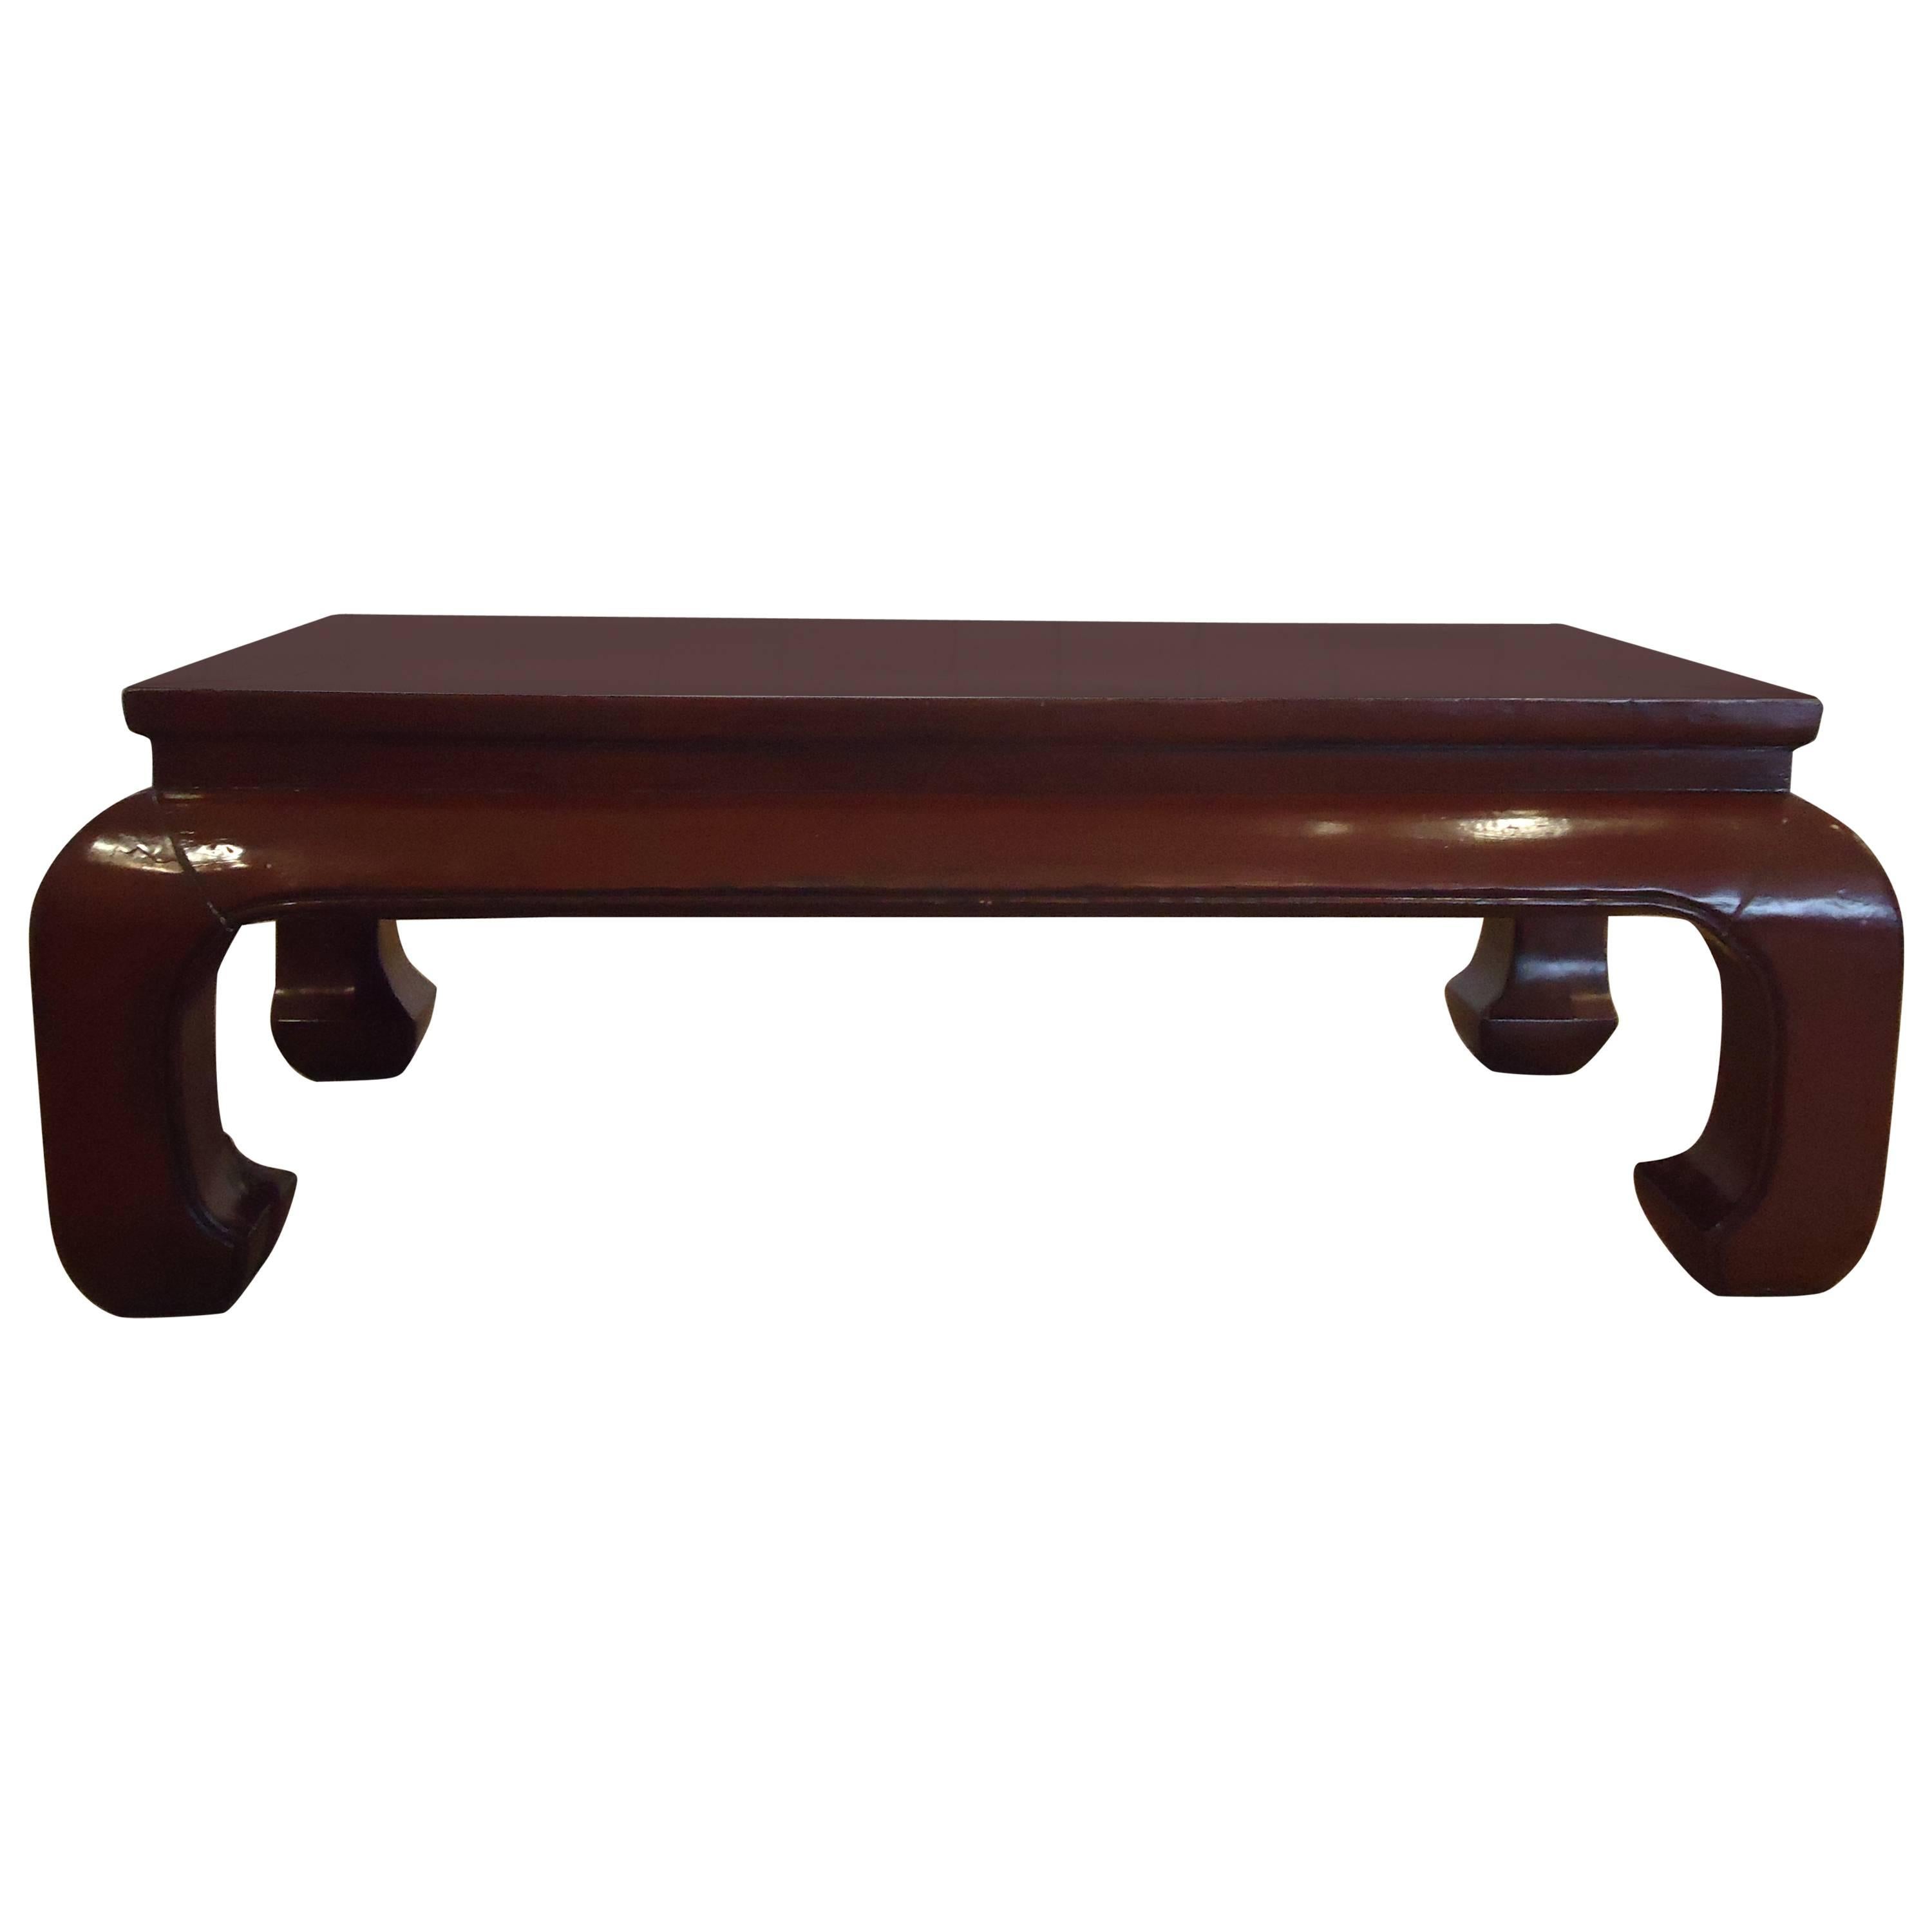 Stunning Dark Red Lacquer Chinese Coffee Table